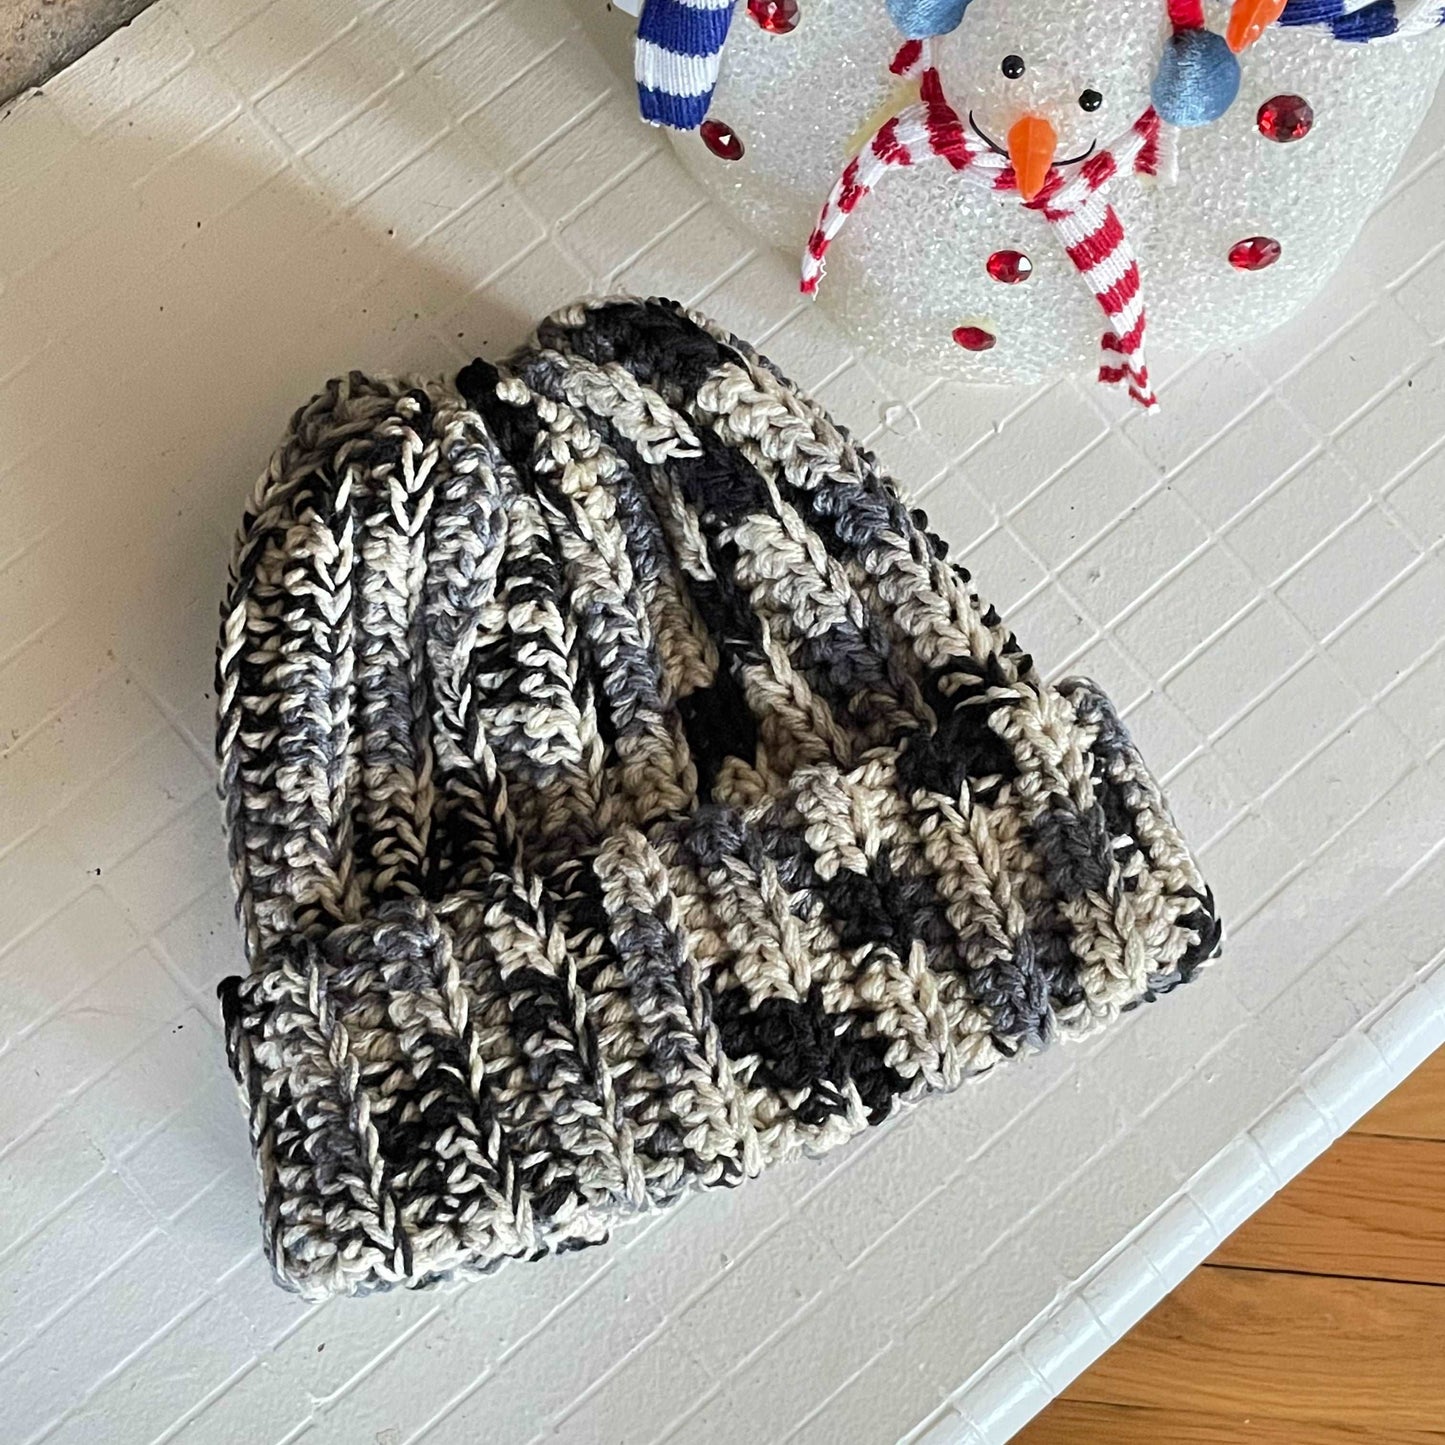 Extra Warm Ribbed Cable Knit Hat in Black Grey & Cream Marble Hand Crocheted Beanie